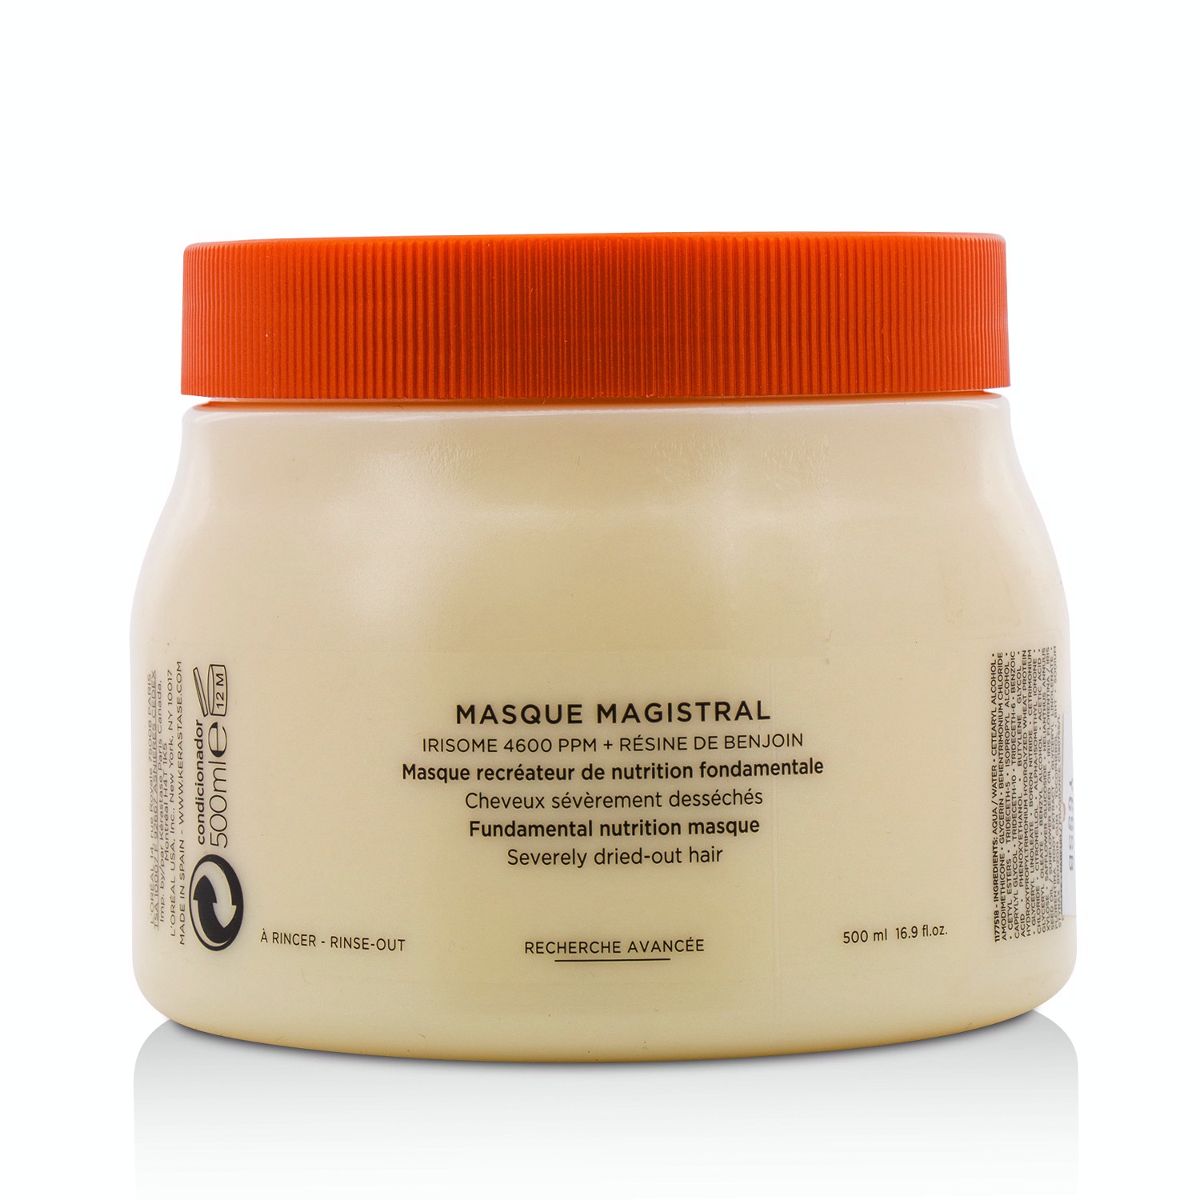 Nutritive Masque Magistral Fundamental Nutrition Masque (Severely Dried-Out Hair) Kerastase Image